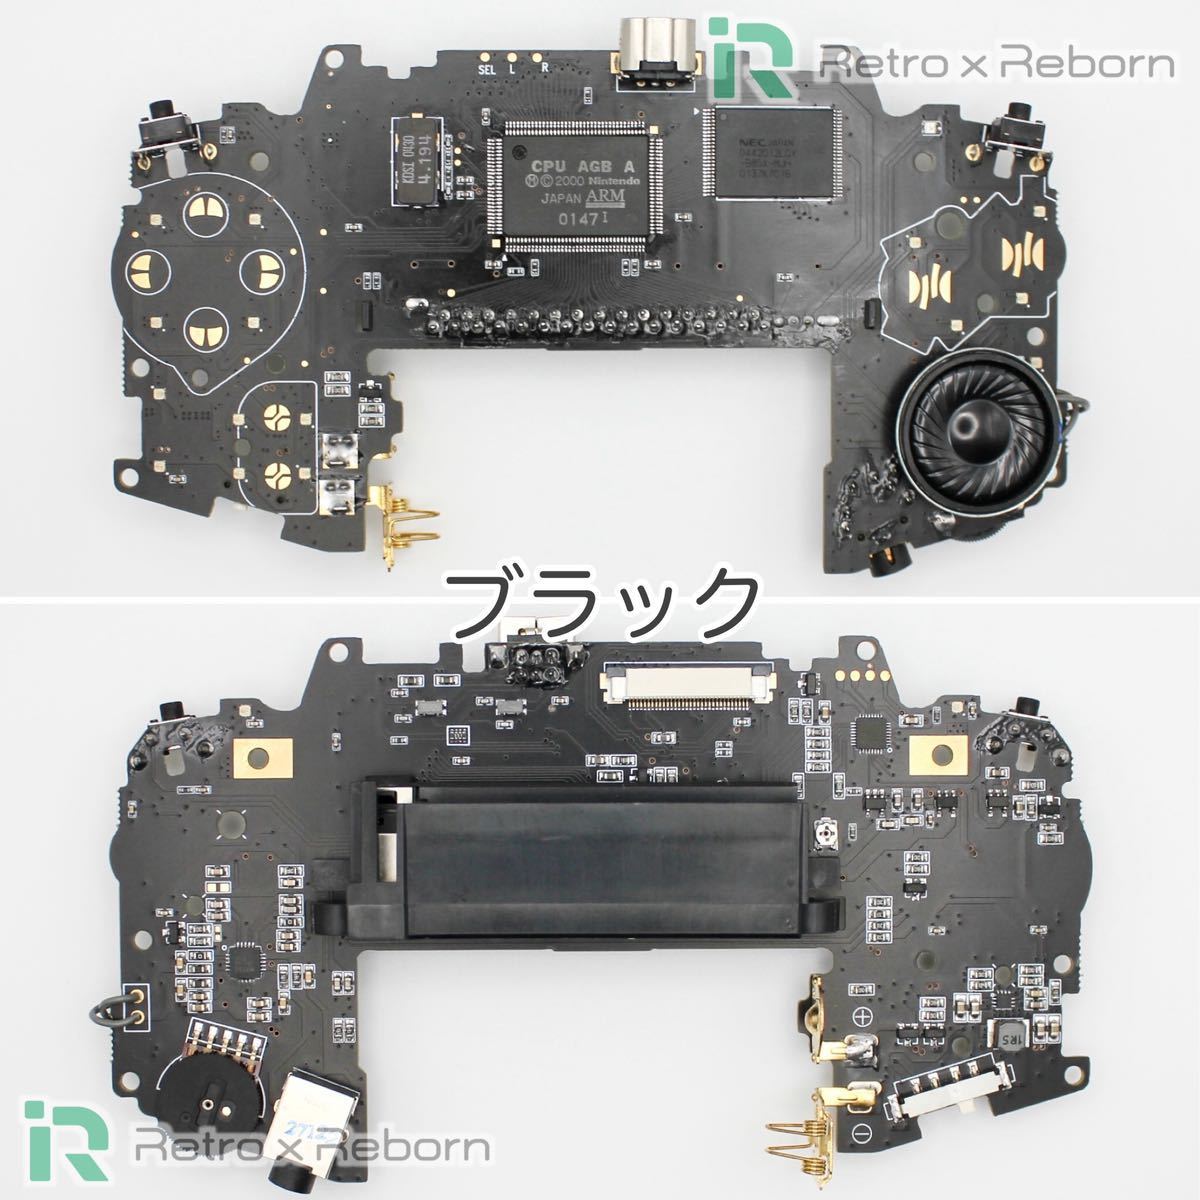  Game Boy Advance for up grade motherboard 6 pieces set 